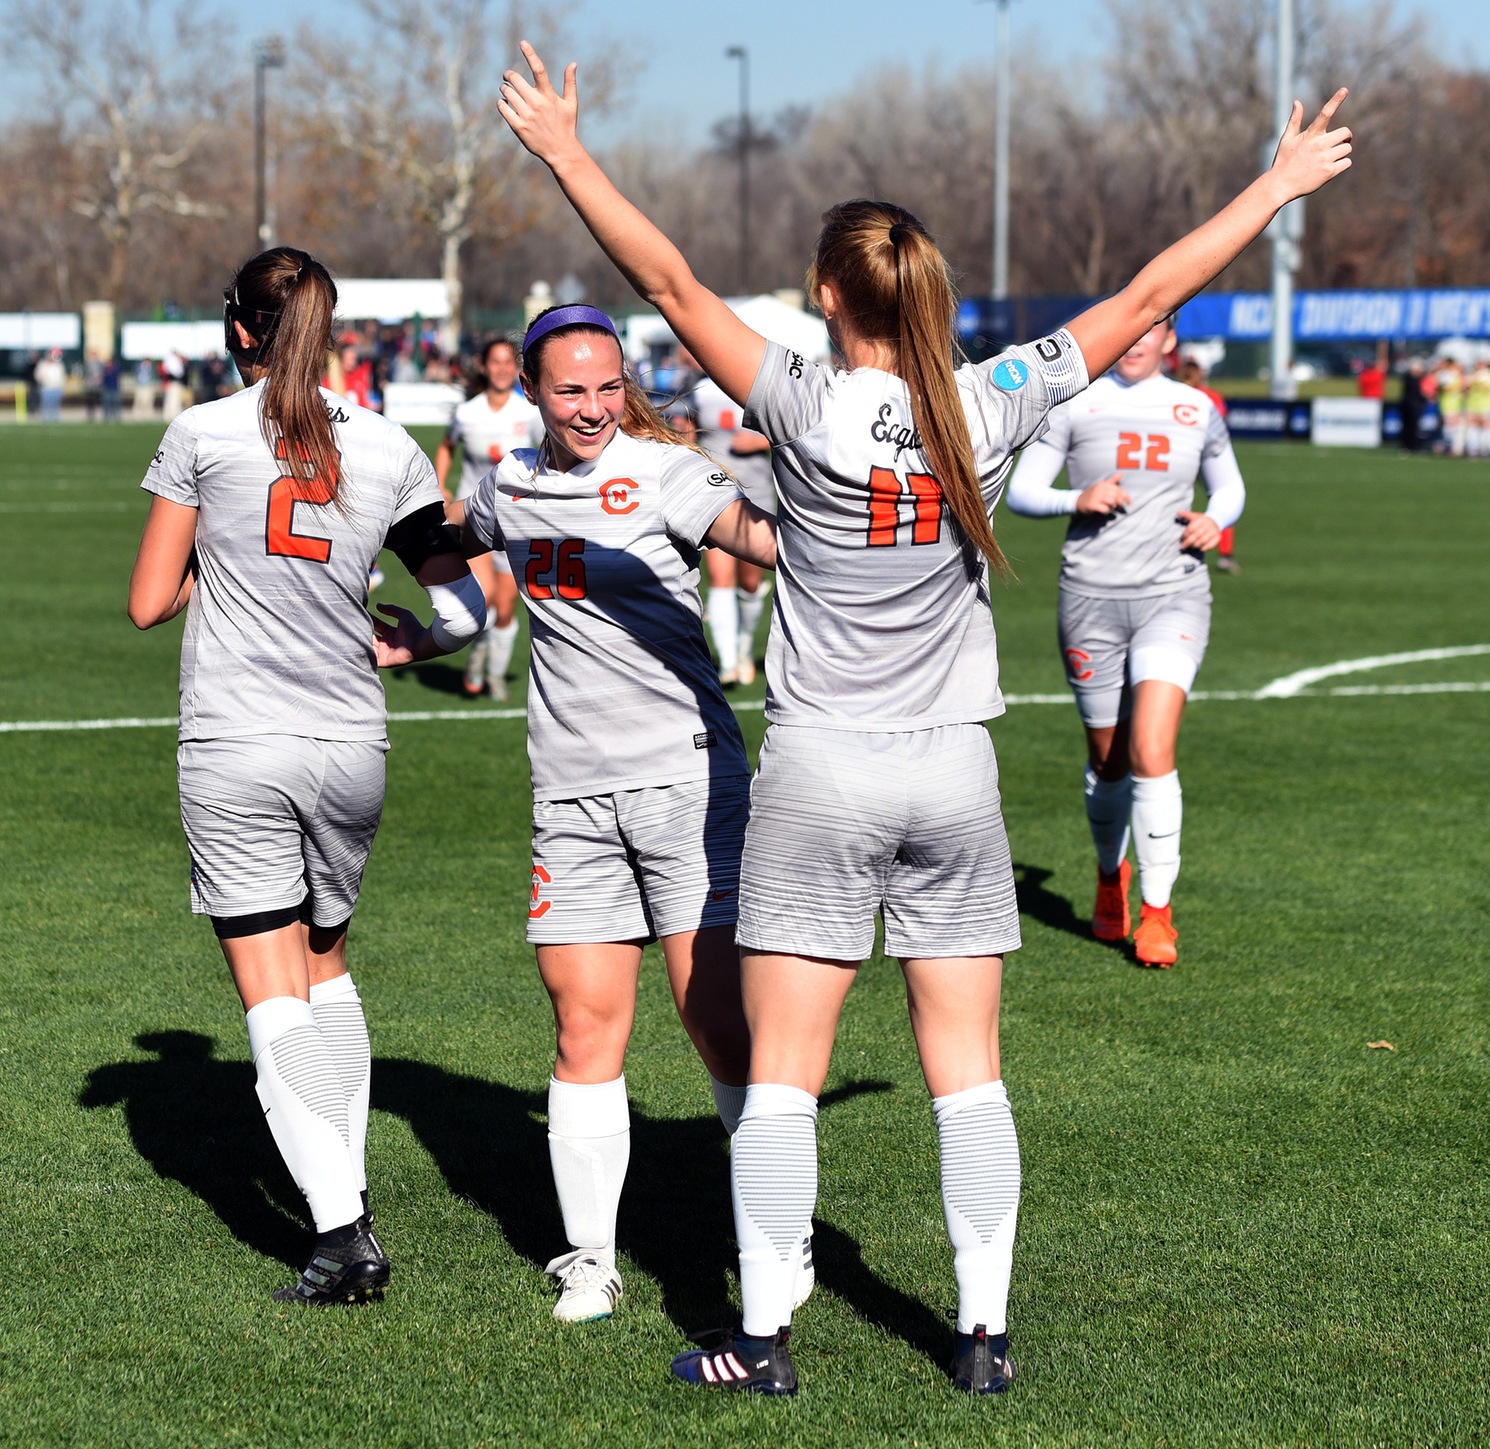 Historic season comes to a close for Carson-Newman in National title match